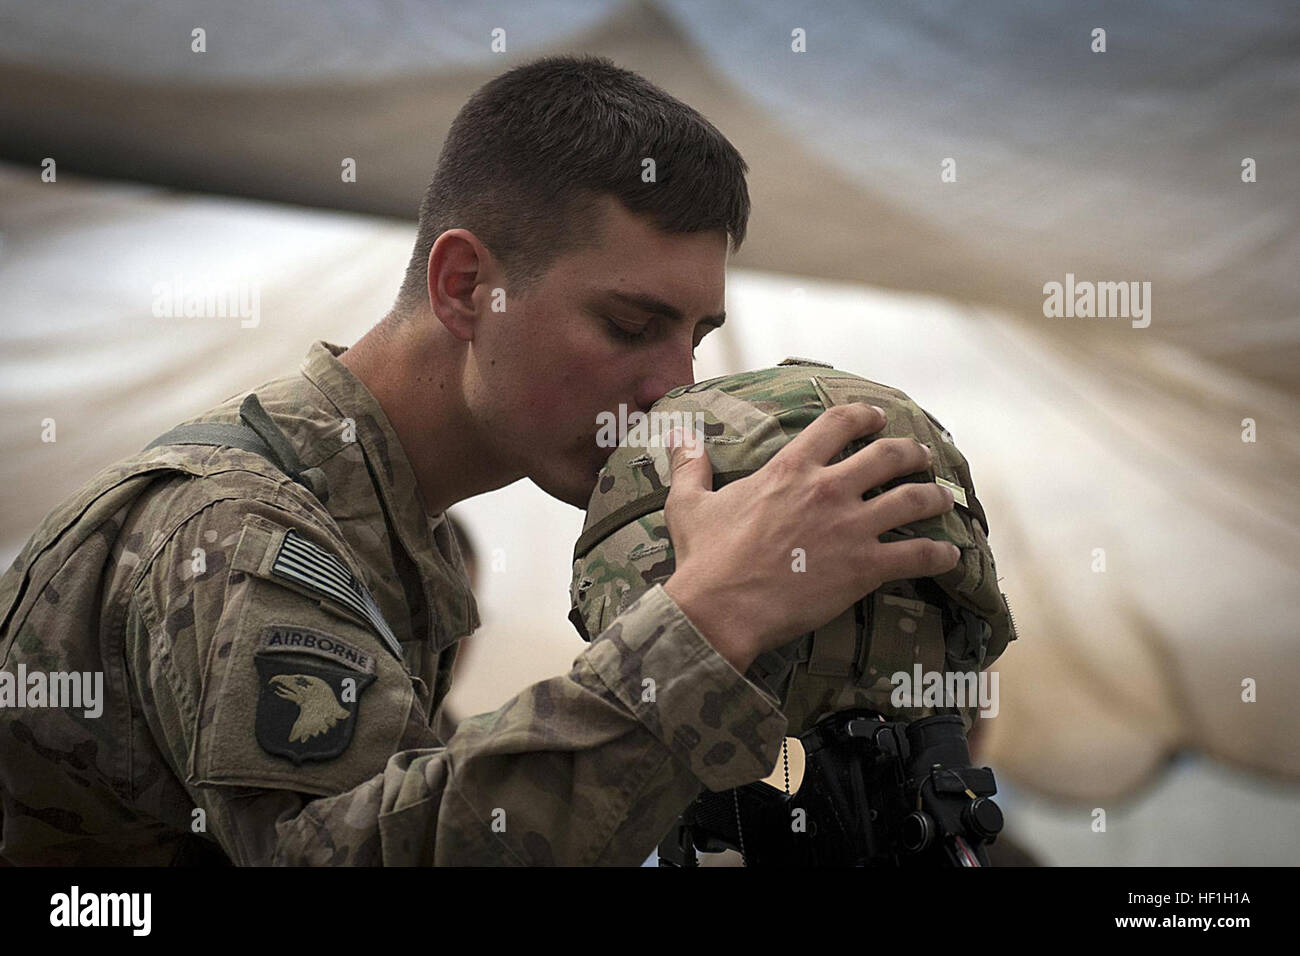 U.S. Army Spc. Brit B. Jacobs, a combat medic from Sarasota, Fla., assigned to Company C, 2nd Battalion, 327th Infantry Regiment, Task Force No Slack, 1st Brigade Combat Team, 101st Airborne Division, gives a farewell kiss to the helmet of one of his fallen comrades during a memorial service for six fallen U.S. soldiers at Forward Operating Base Joyce in eastern Afghanistan's Kunar province April 9. Jacobs helped treat some of the wounded on the battlefield when six of his brethren died, March 29. Flickr - DVIDSHUB - Six TF No Slack soldiers remembered (Image 3 of 3) Stock Photo